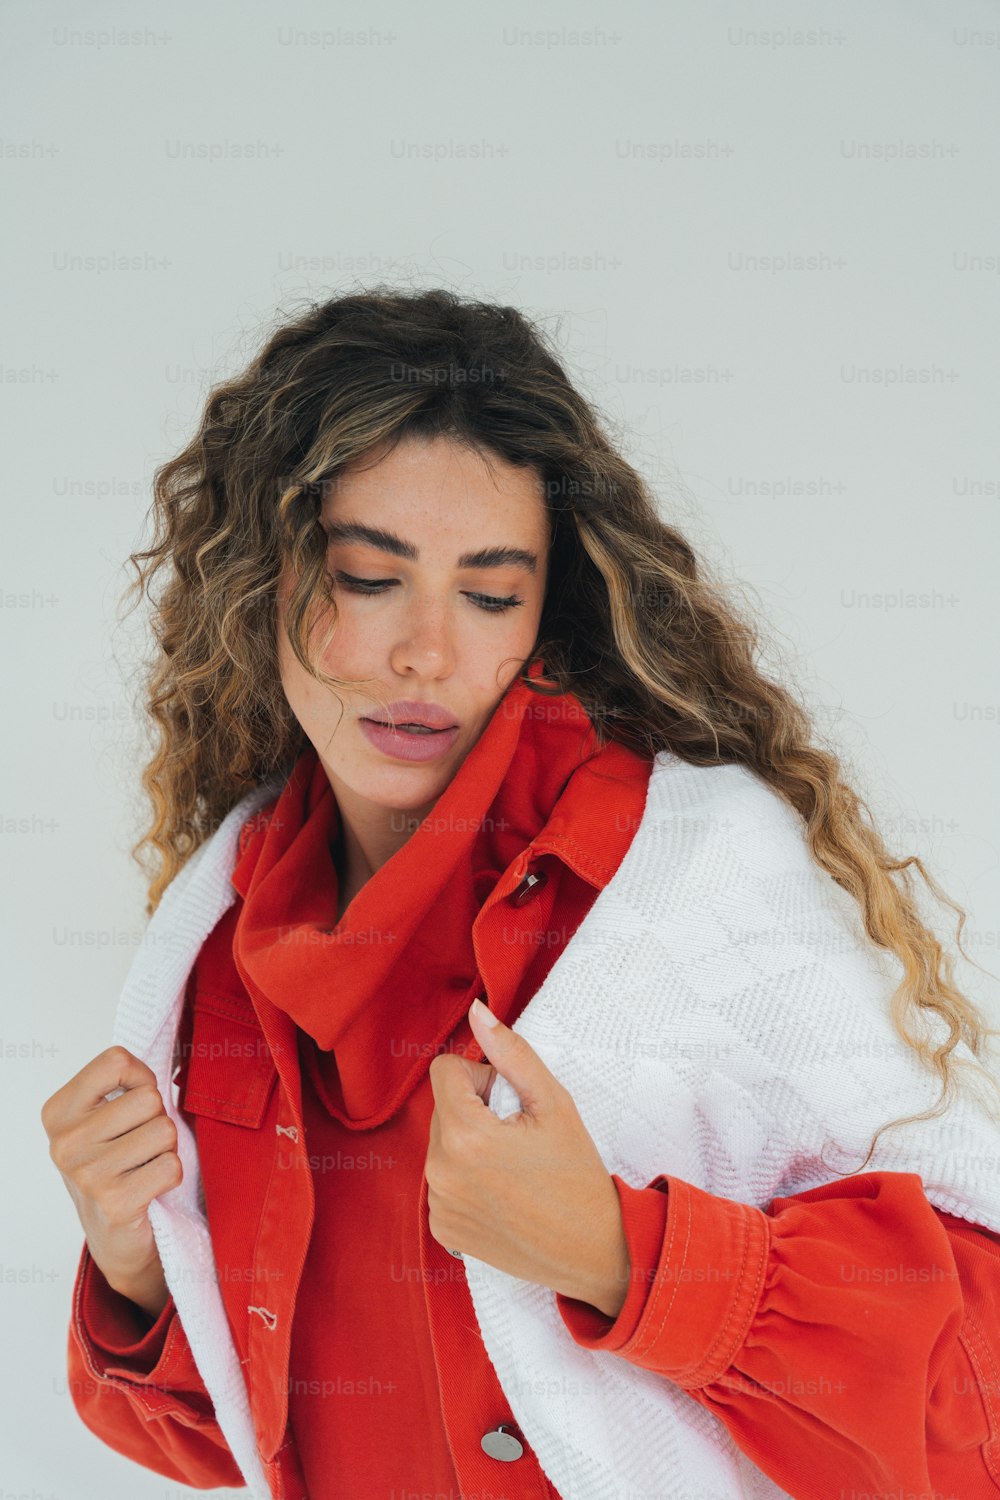 a woman wearing a red and white jacket and a red scarf